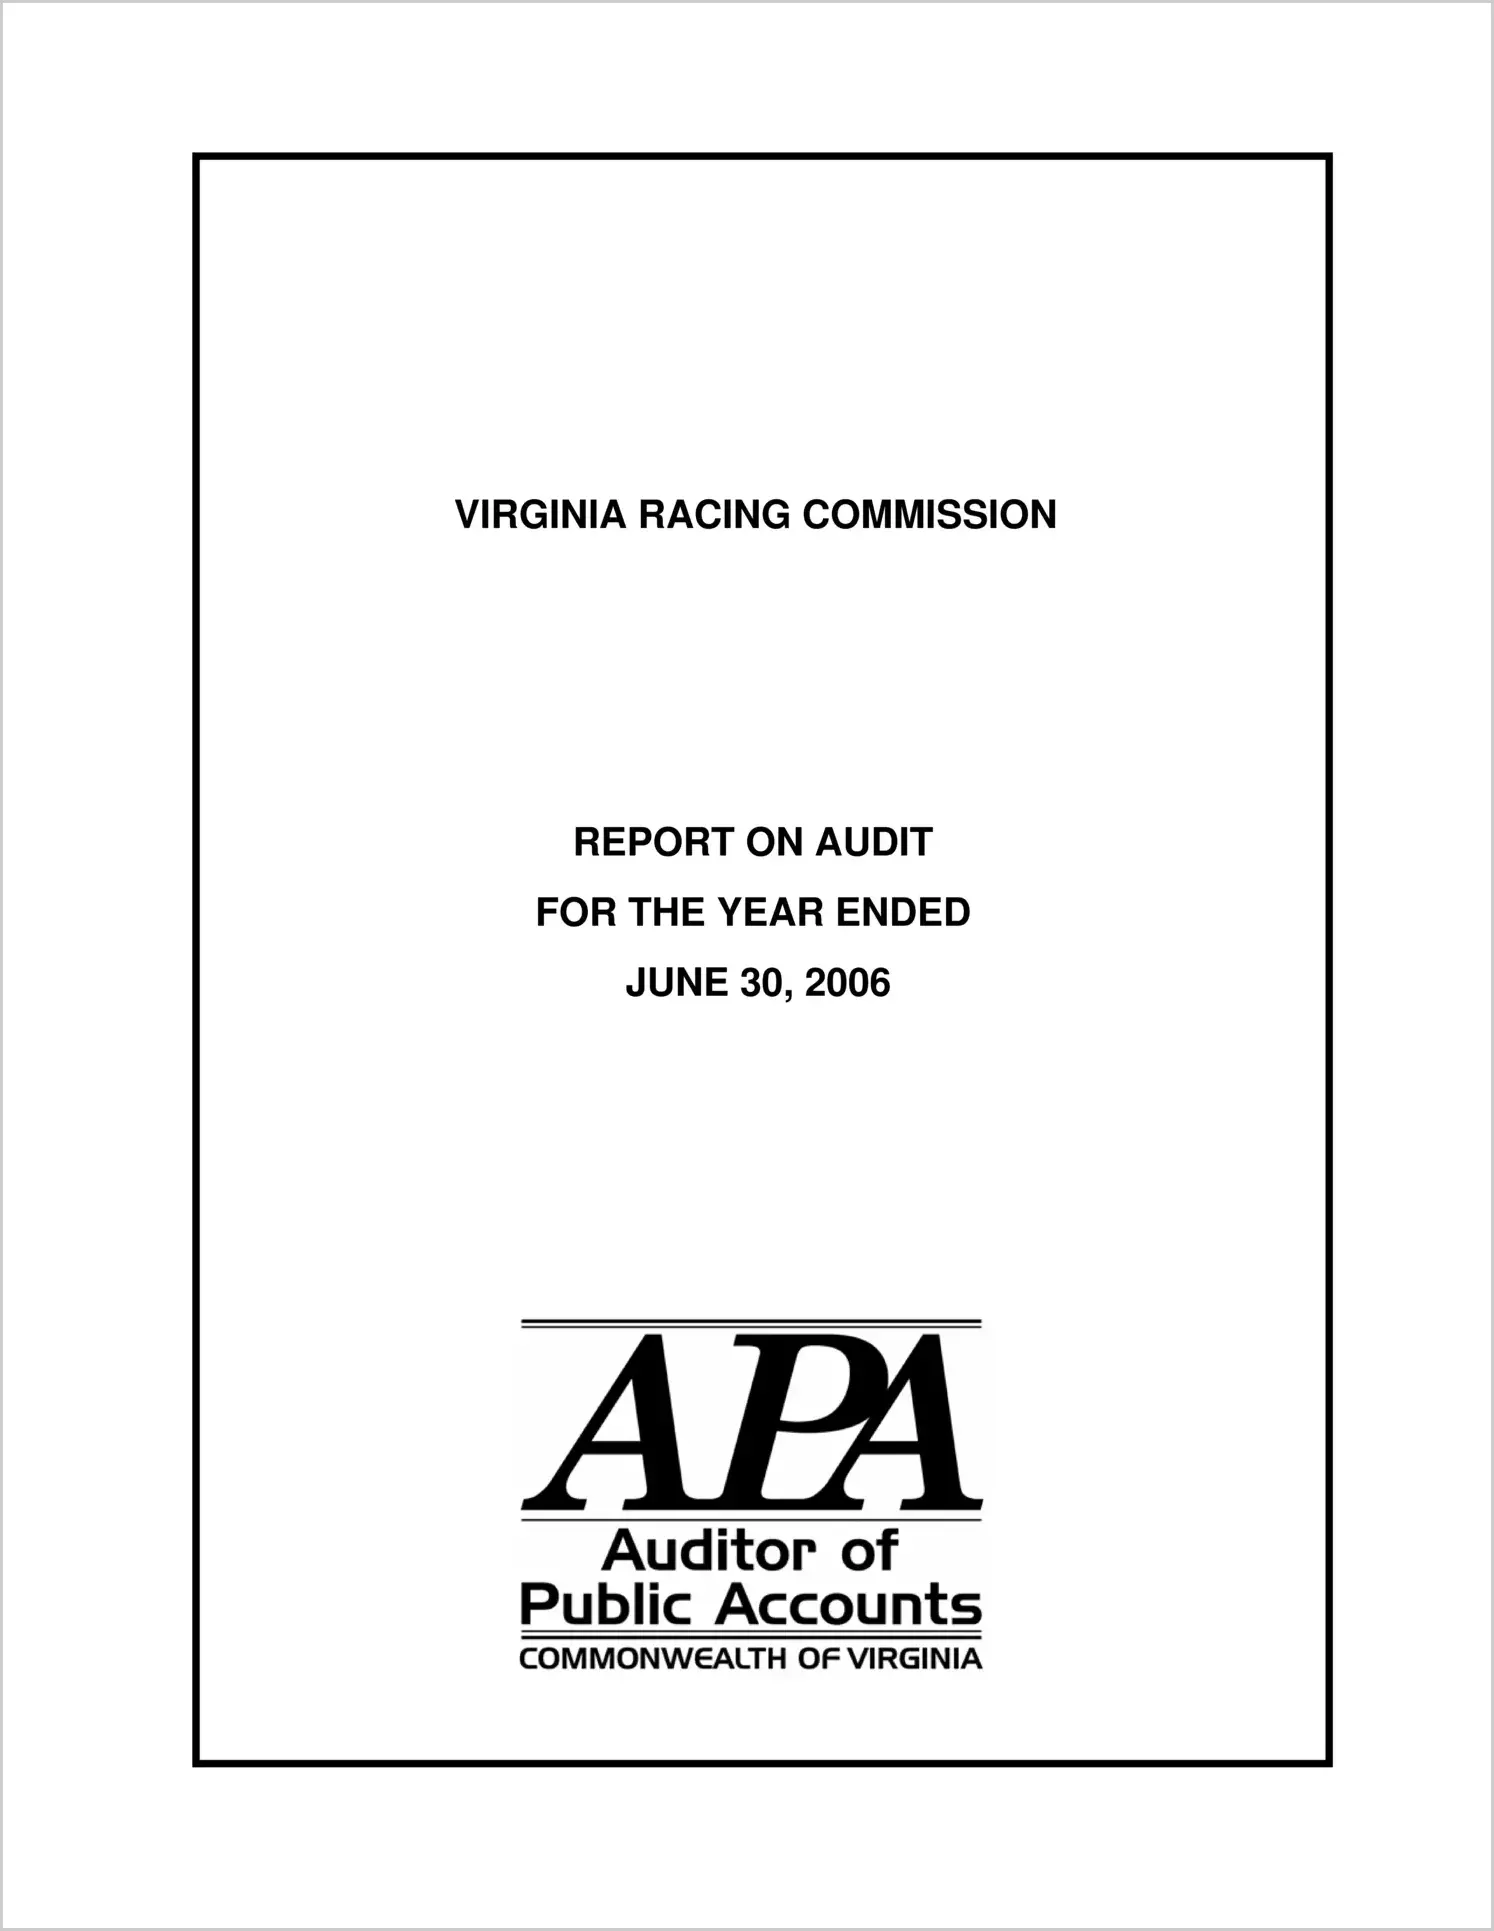 Virginia Racing Commission for the year ended June 30, 2006